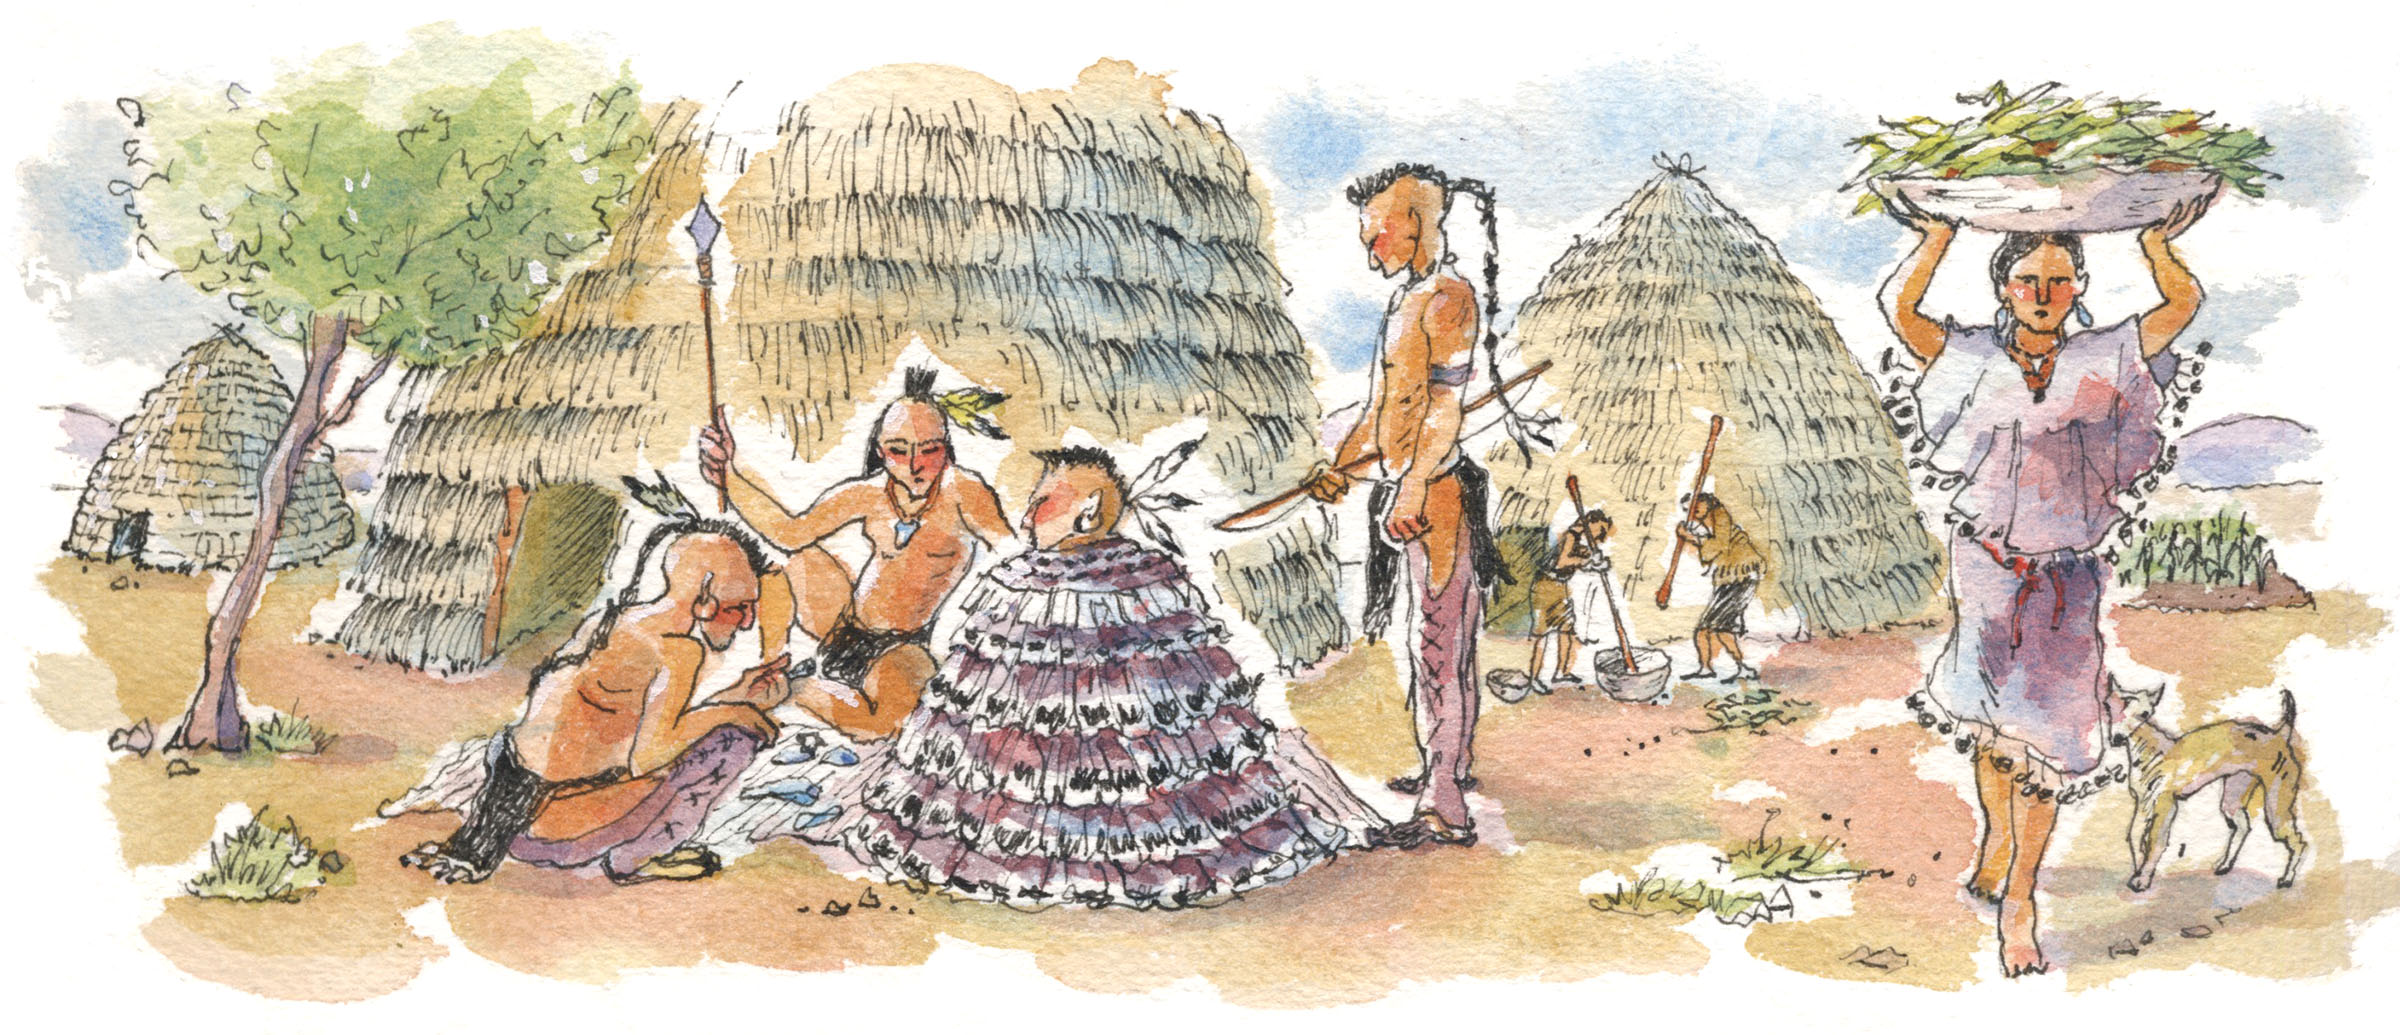 An illustration of Native Americans decorating a person with many purple feathers and another person carrying a large basket of corn